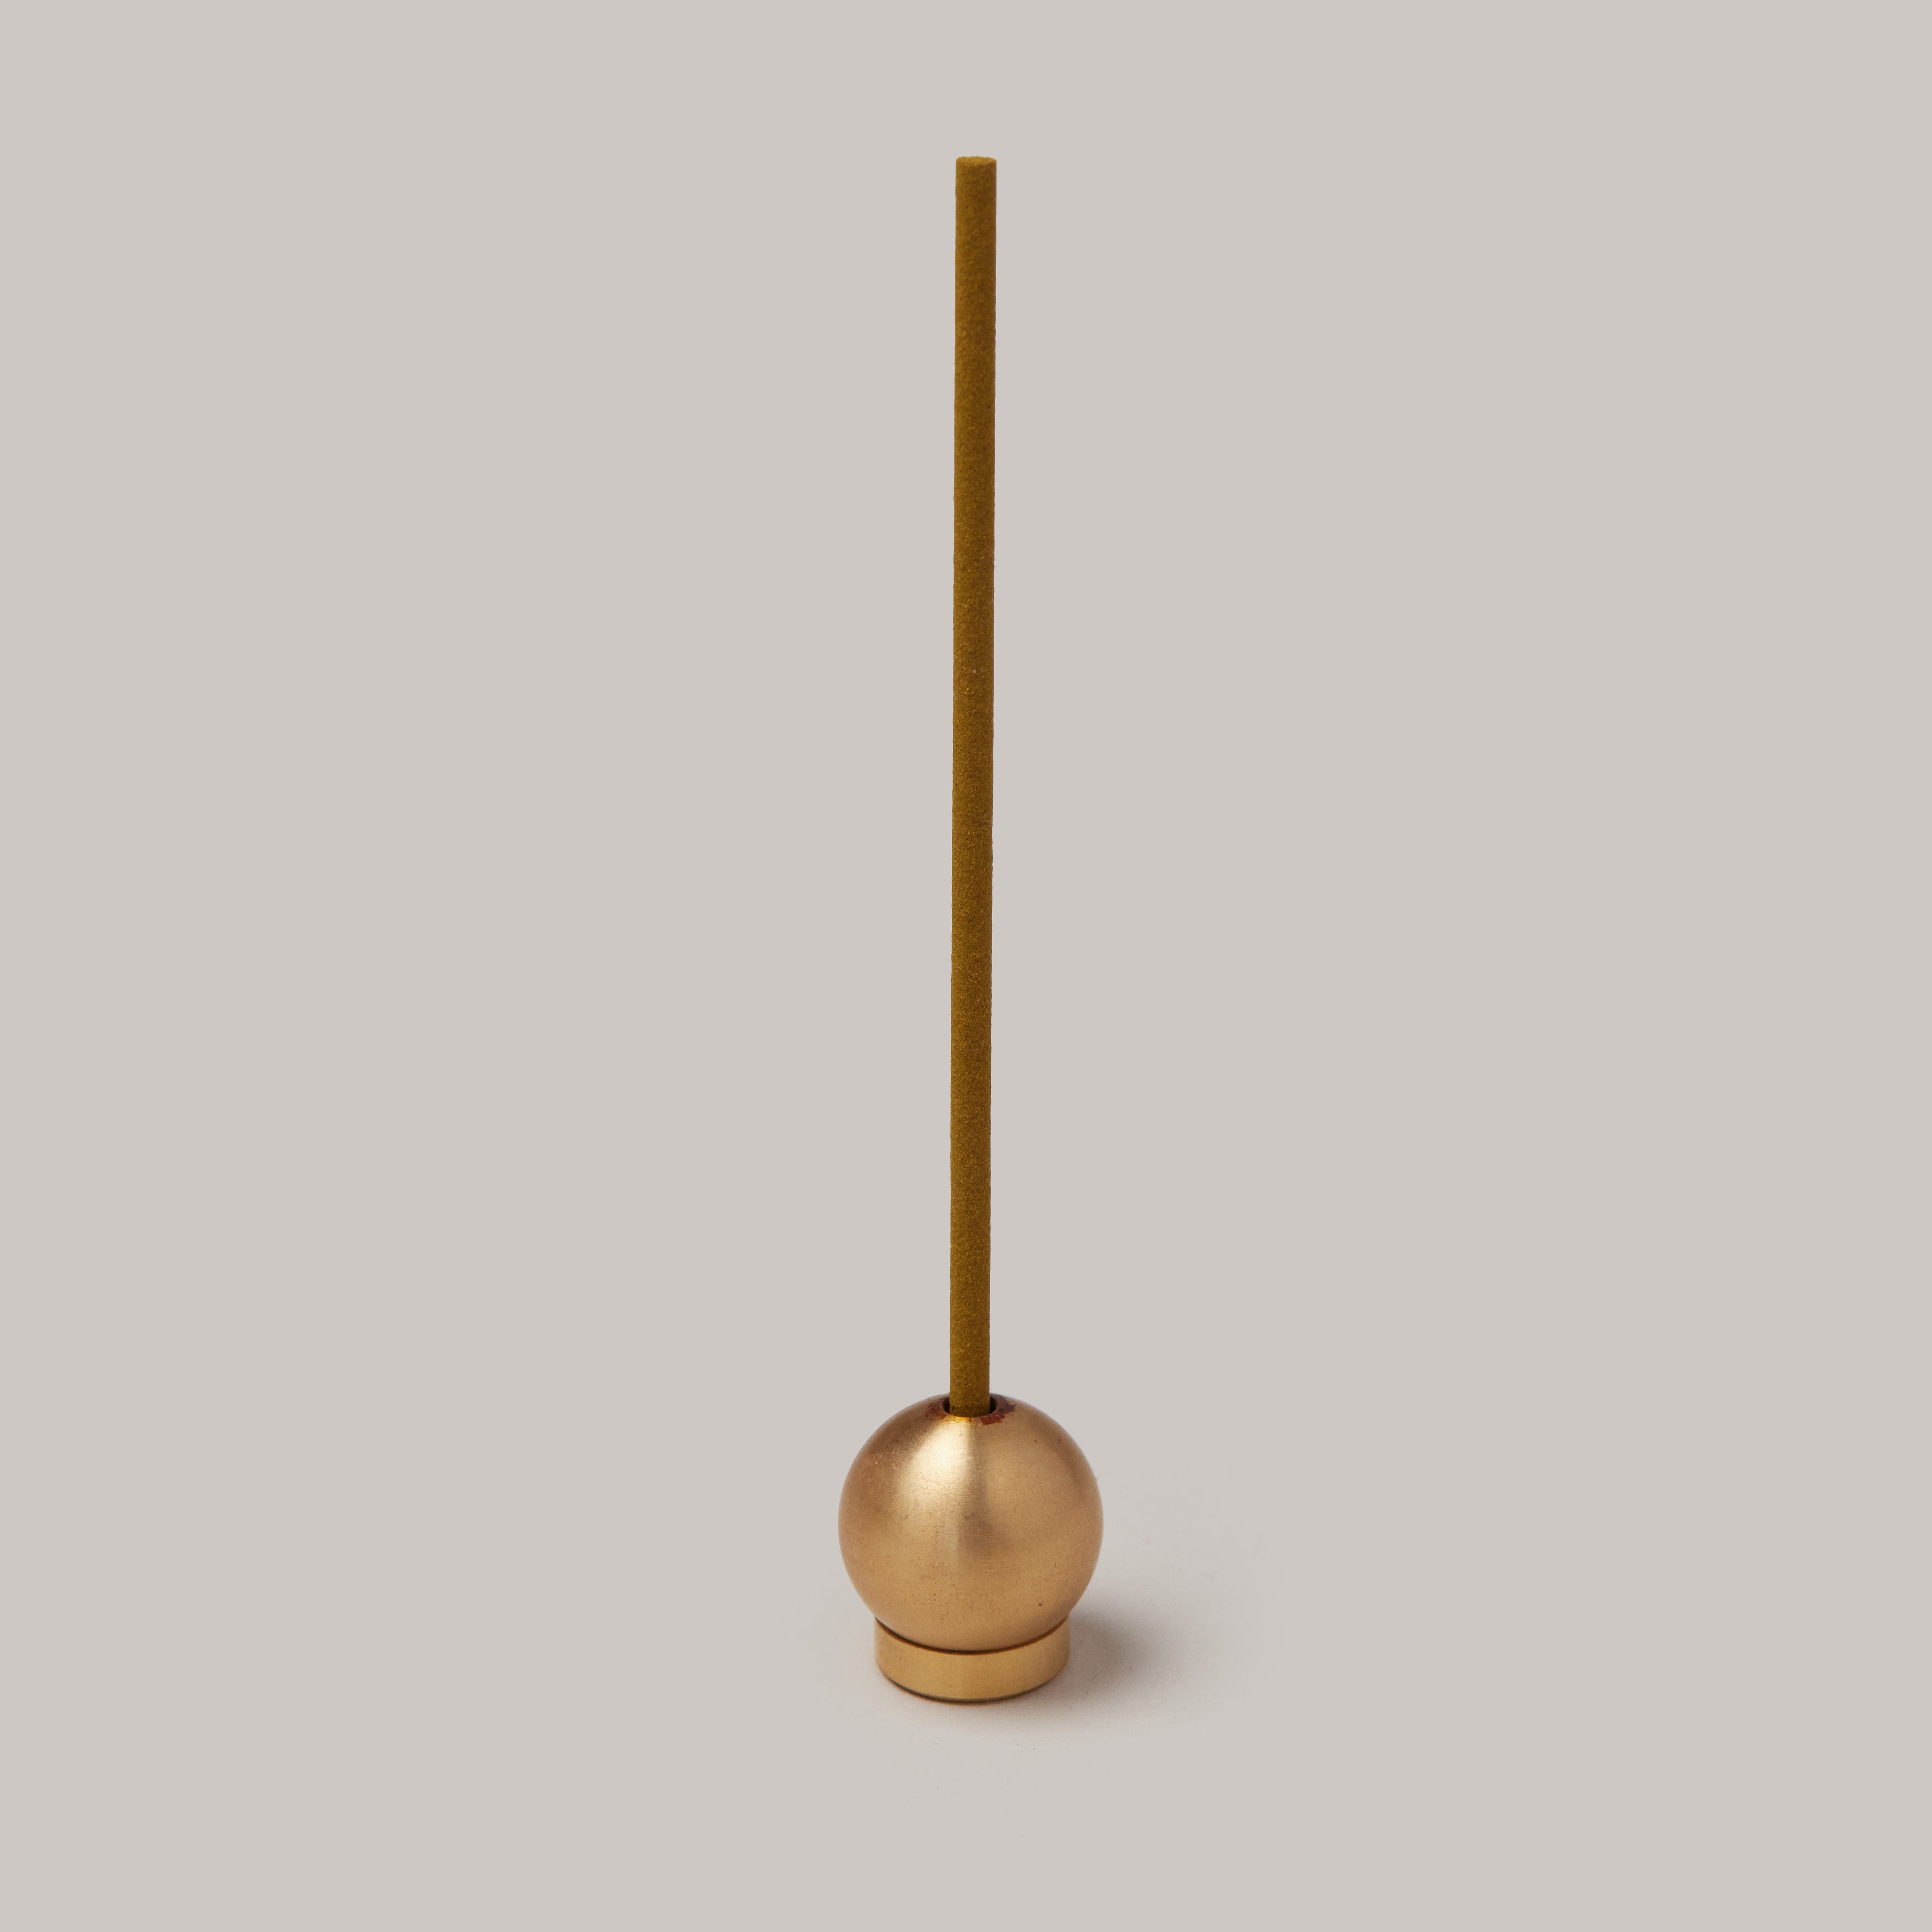 Ball Shaped Incense Holder w/ stand